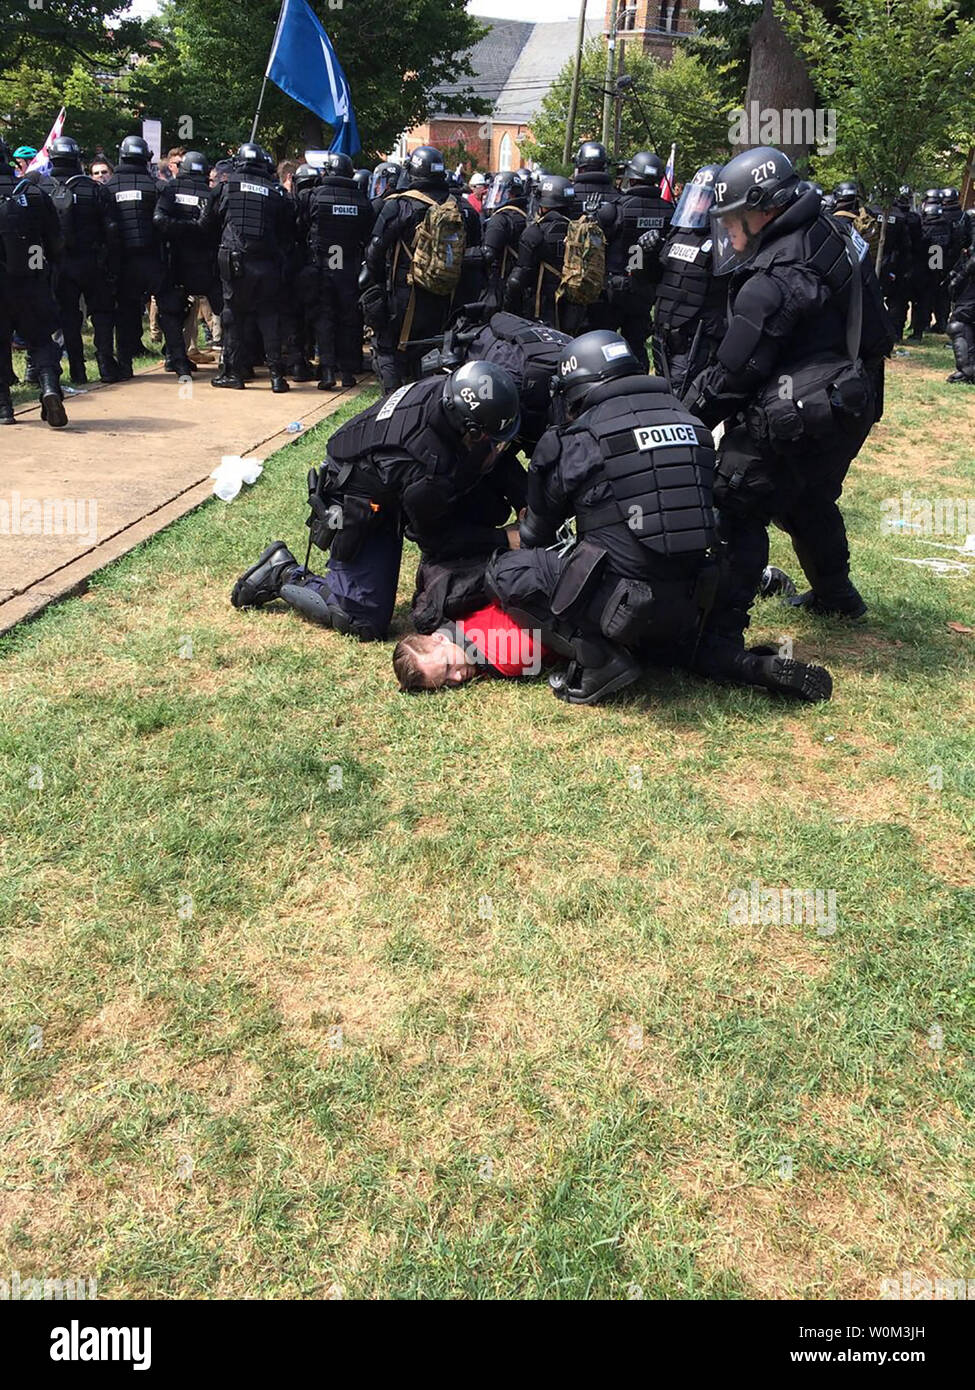 Riot police arrest a protester during after declaring the event an unlawful assembly. Virginia Gov. Terry McAuliffe declared a state of emergency as authorities, including police and members of the National Guard, blocked off sections of Charlottesville, Virginia, on August 12, 2017. The action was in response to violence between supporters of the Alt-Right Unite the Right rally and counter-protesters in and around Emancipation Park, the intended site of the rally. Photo by Virginia State Police/UPI Stock Photo